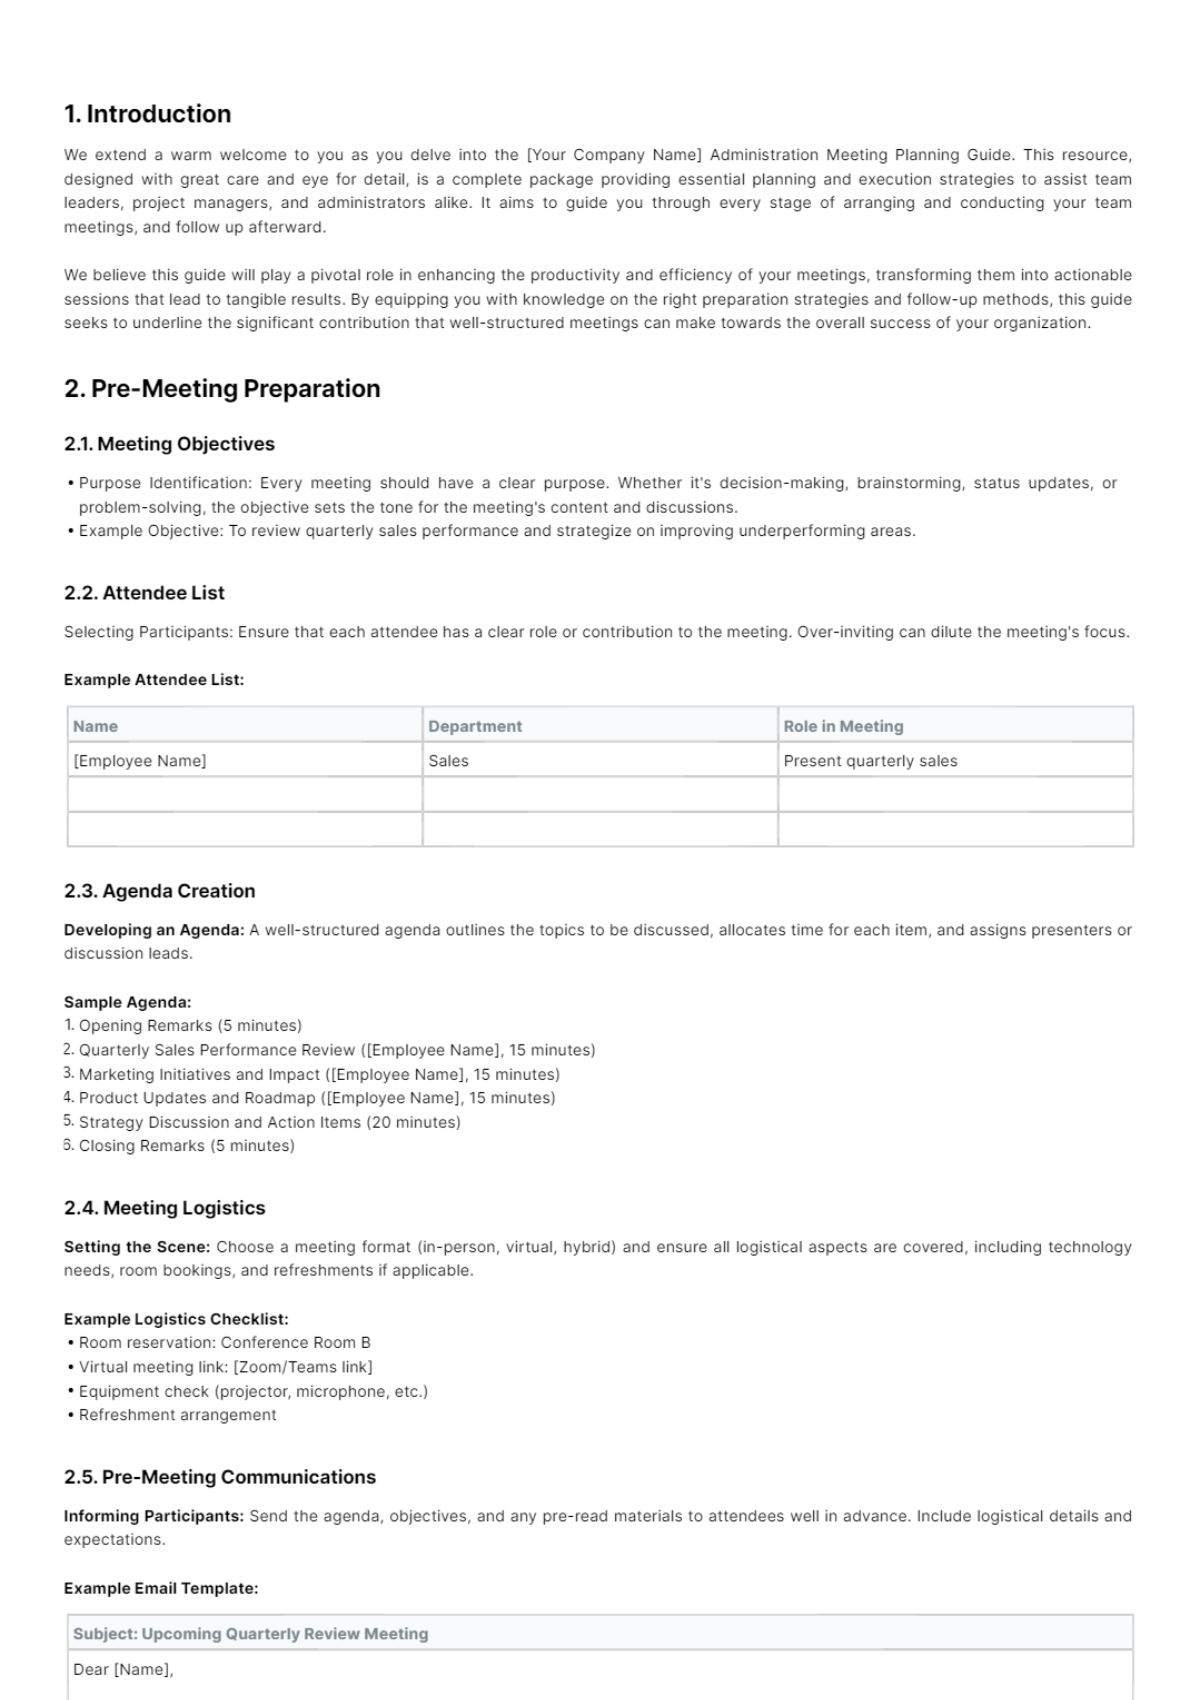 Administration Meeting Planning Guide Template